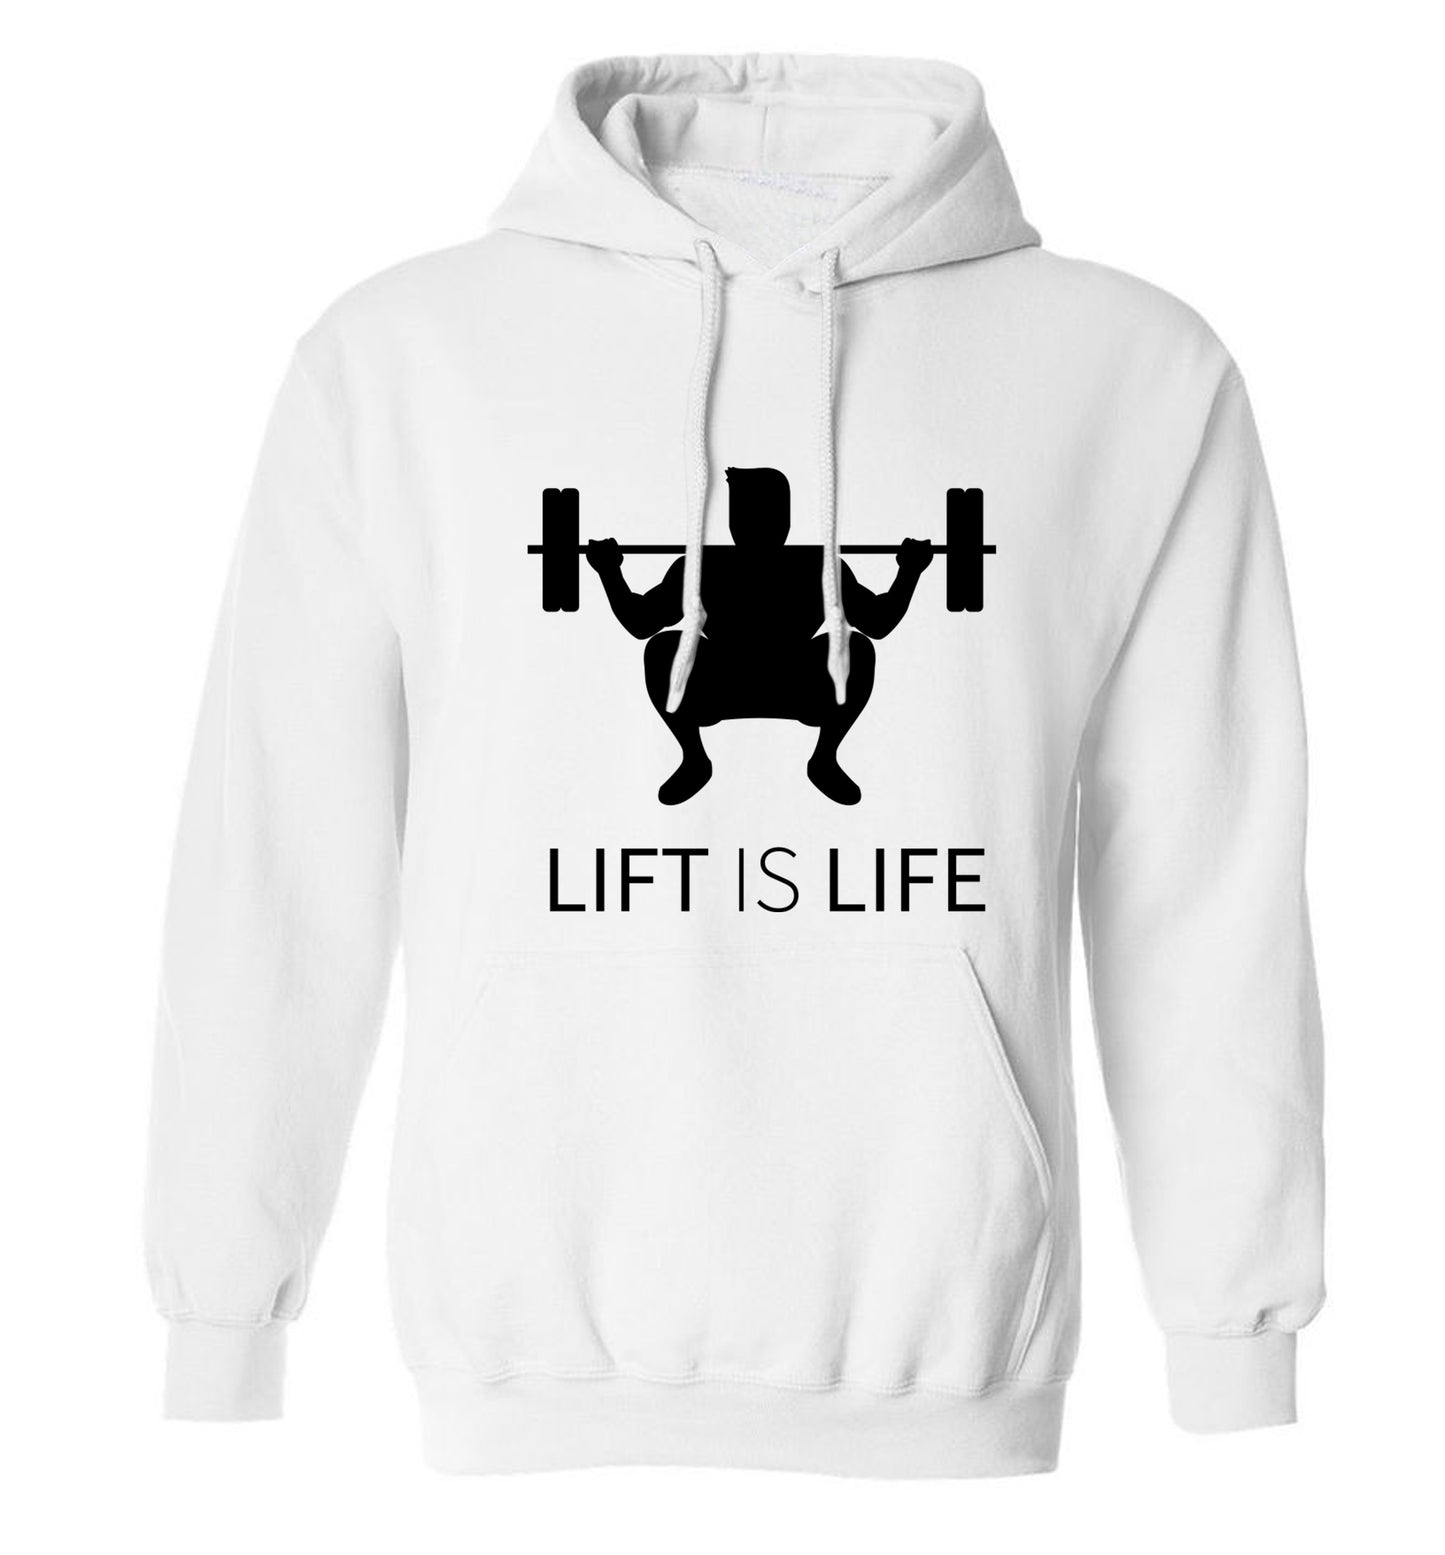 Lift is life adults unisex white hoodie 2XL